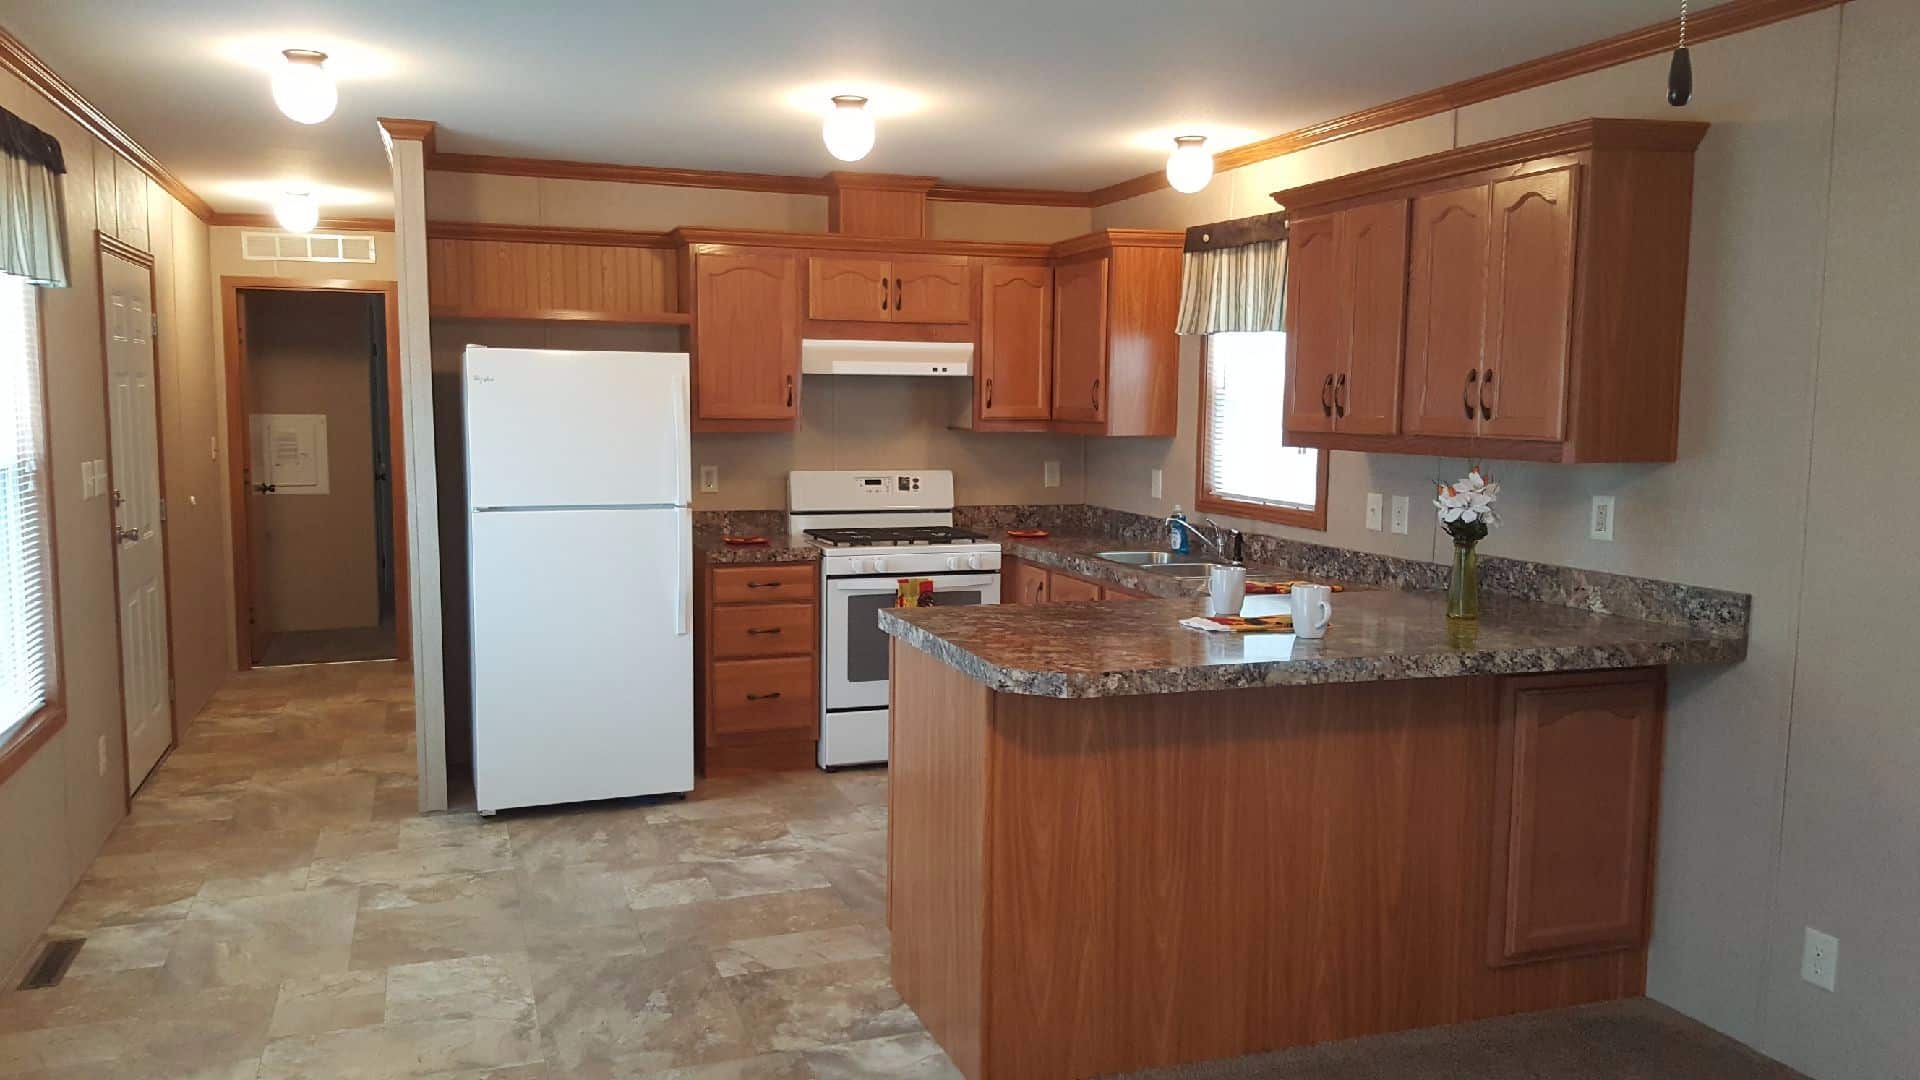 kitchen in 3 bedroom mobile home